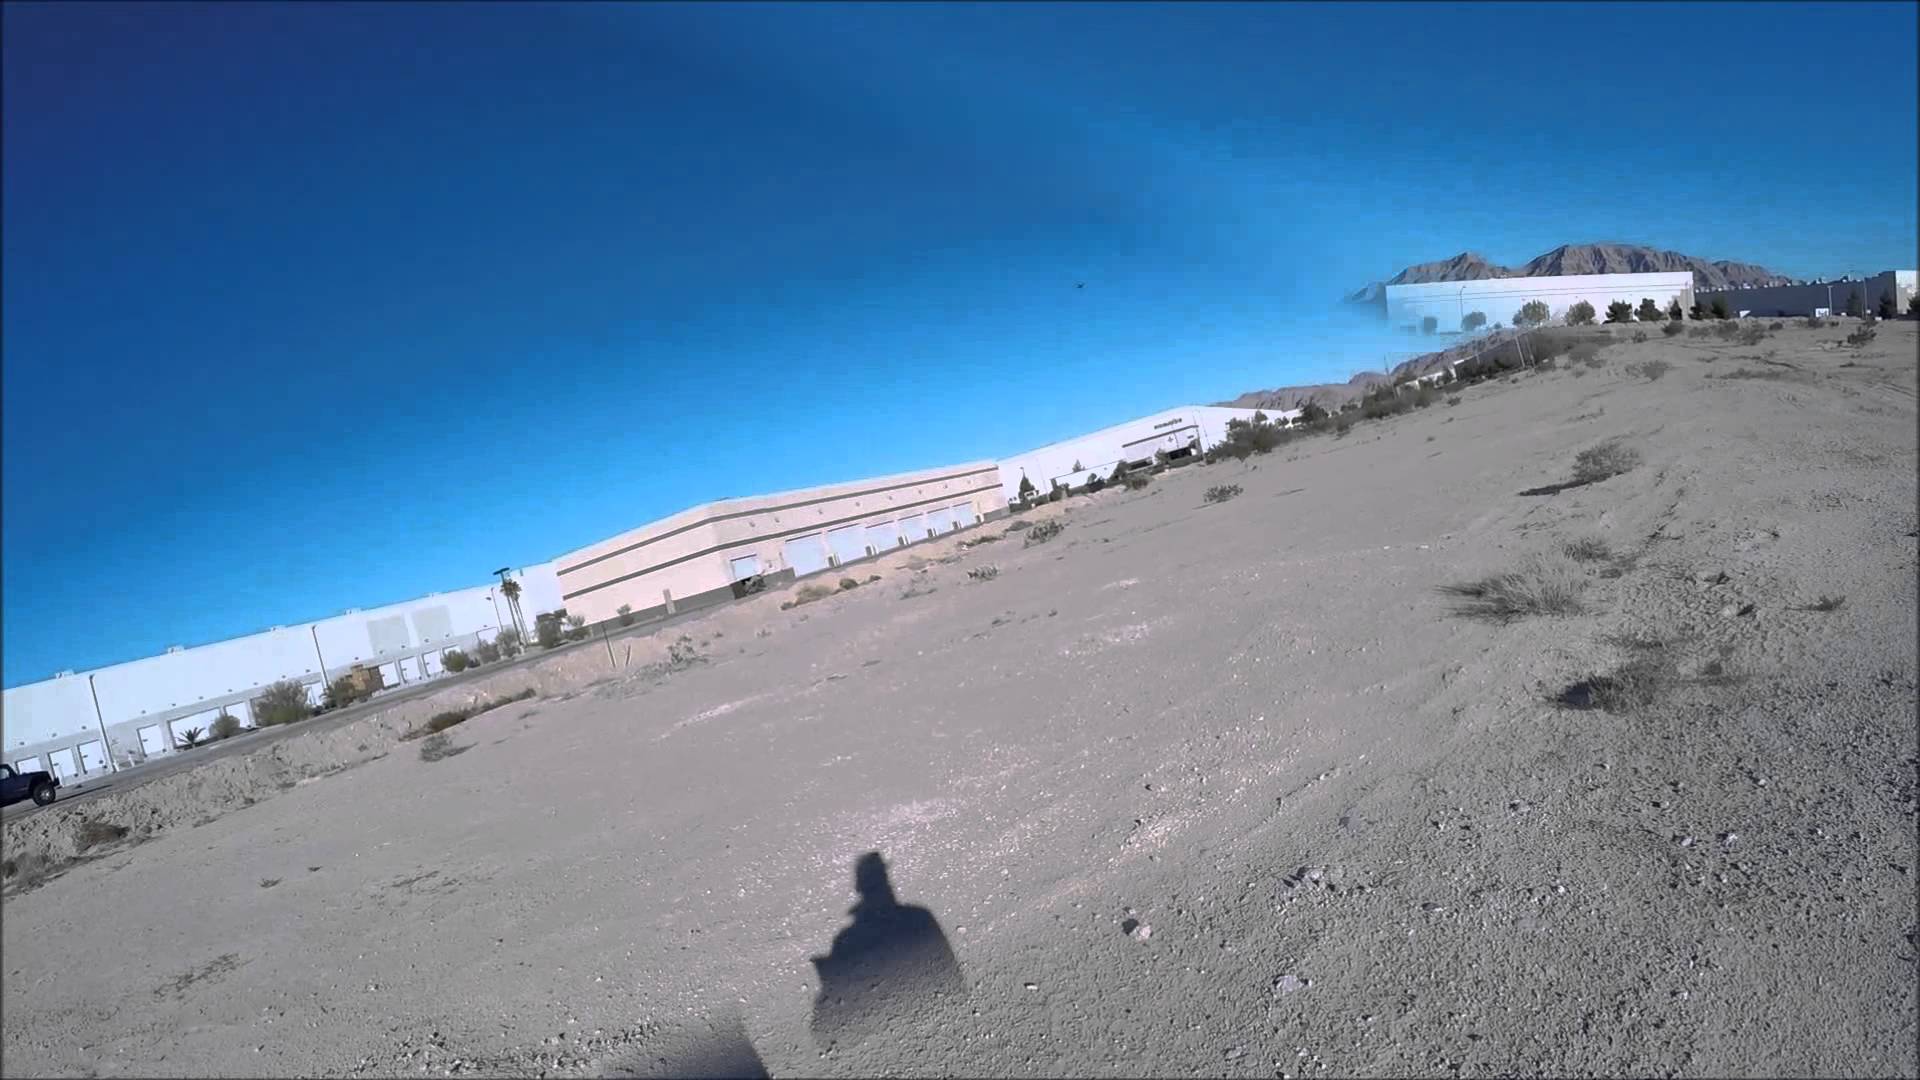 3DR Solo top speed